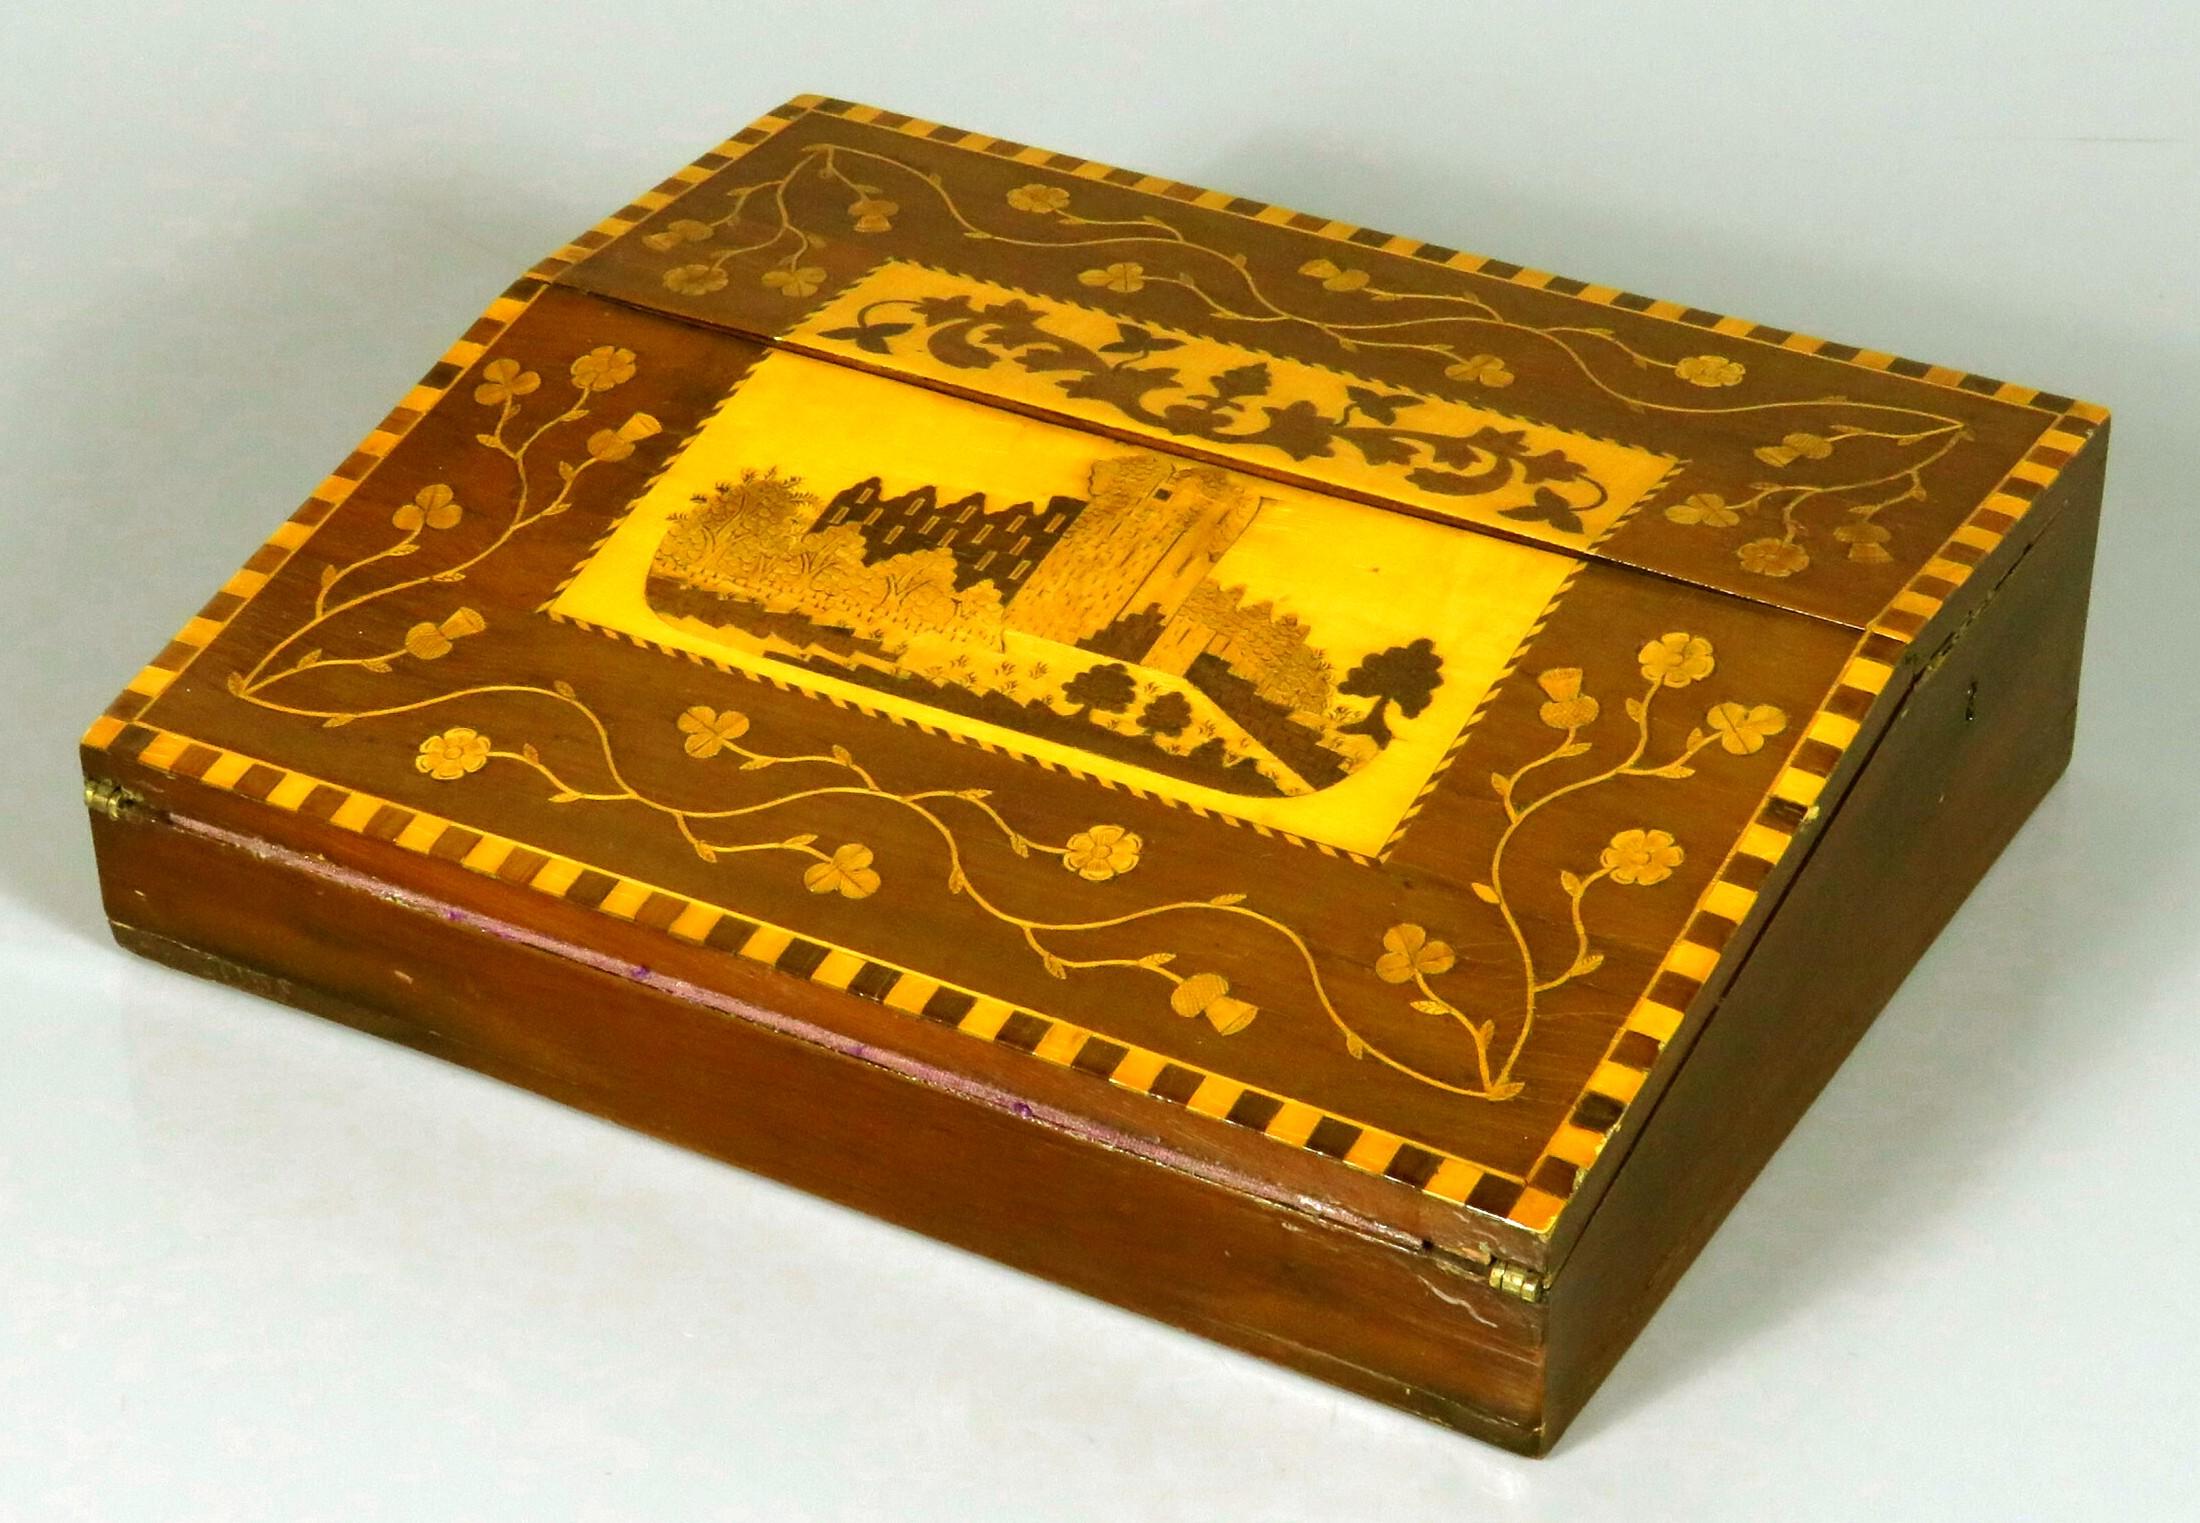 A very handsome & relatively rare Killarney Ware marquetry writing slope / lap desk, the yew wood case is constructed with two fold-over panels decorated with marquetry inlays of arbutus (an indigenous wood species found in and around Killarney)